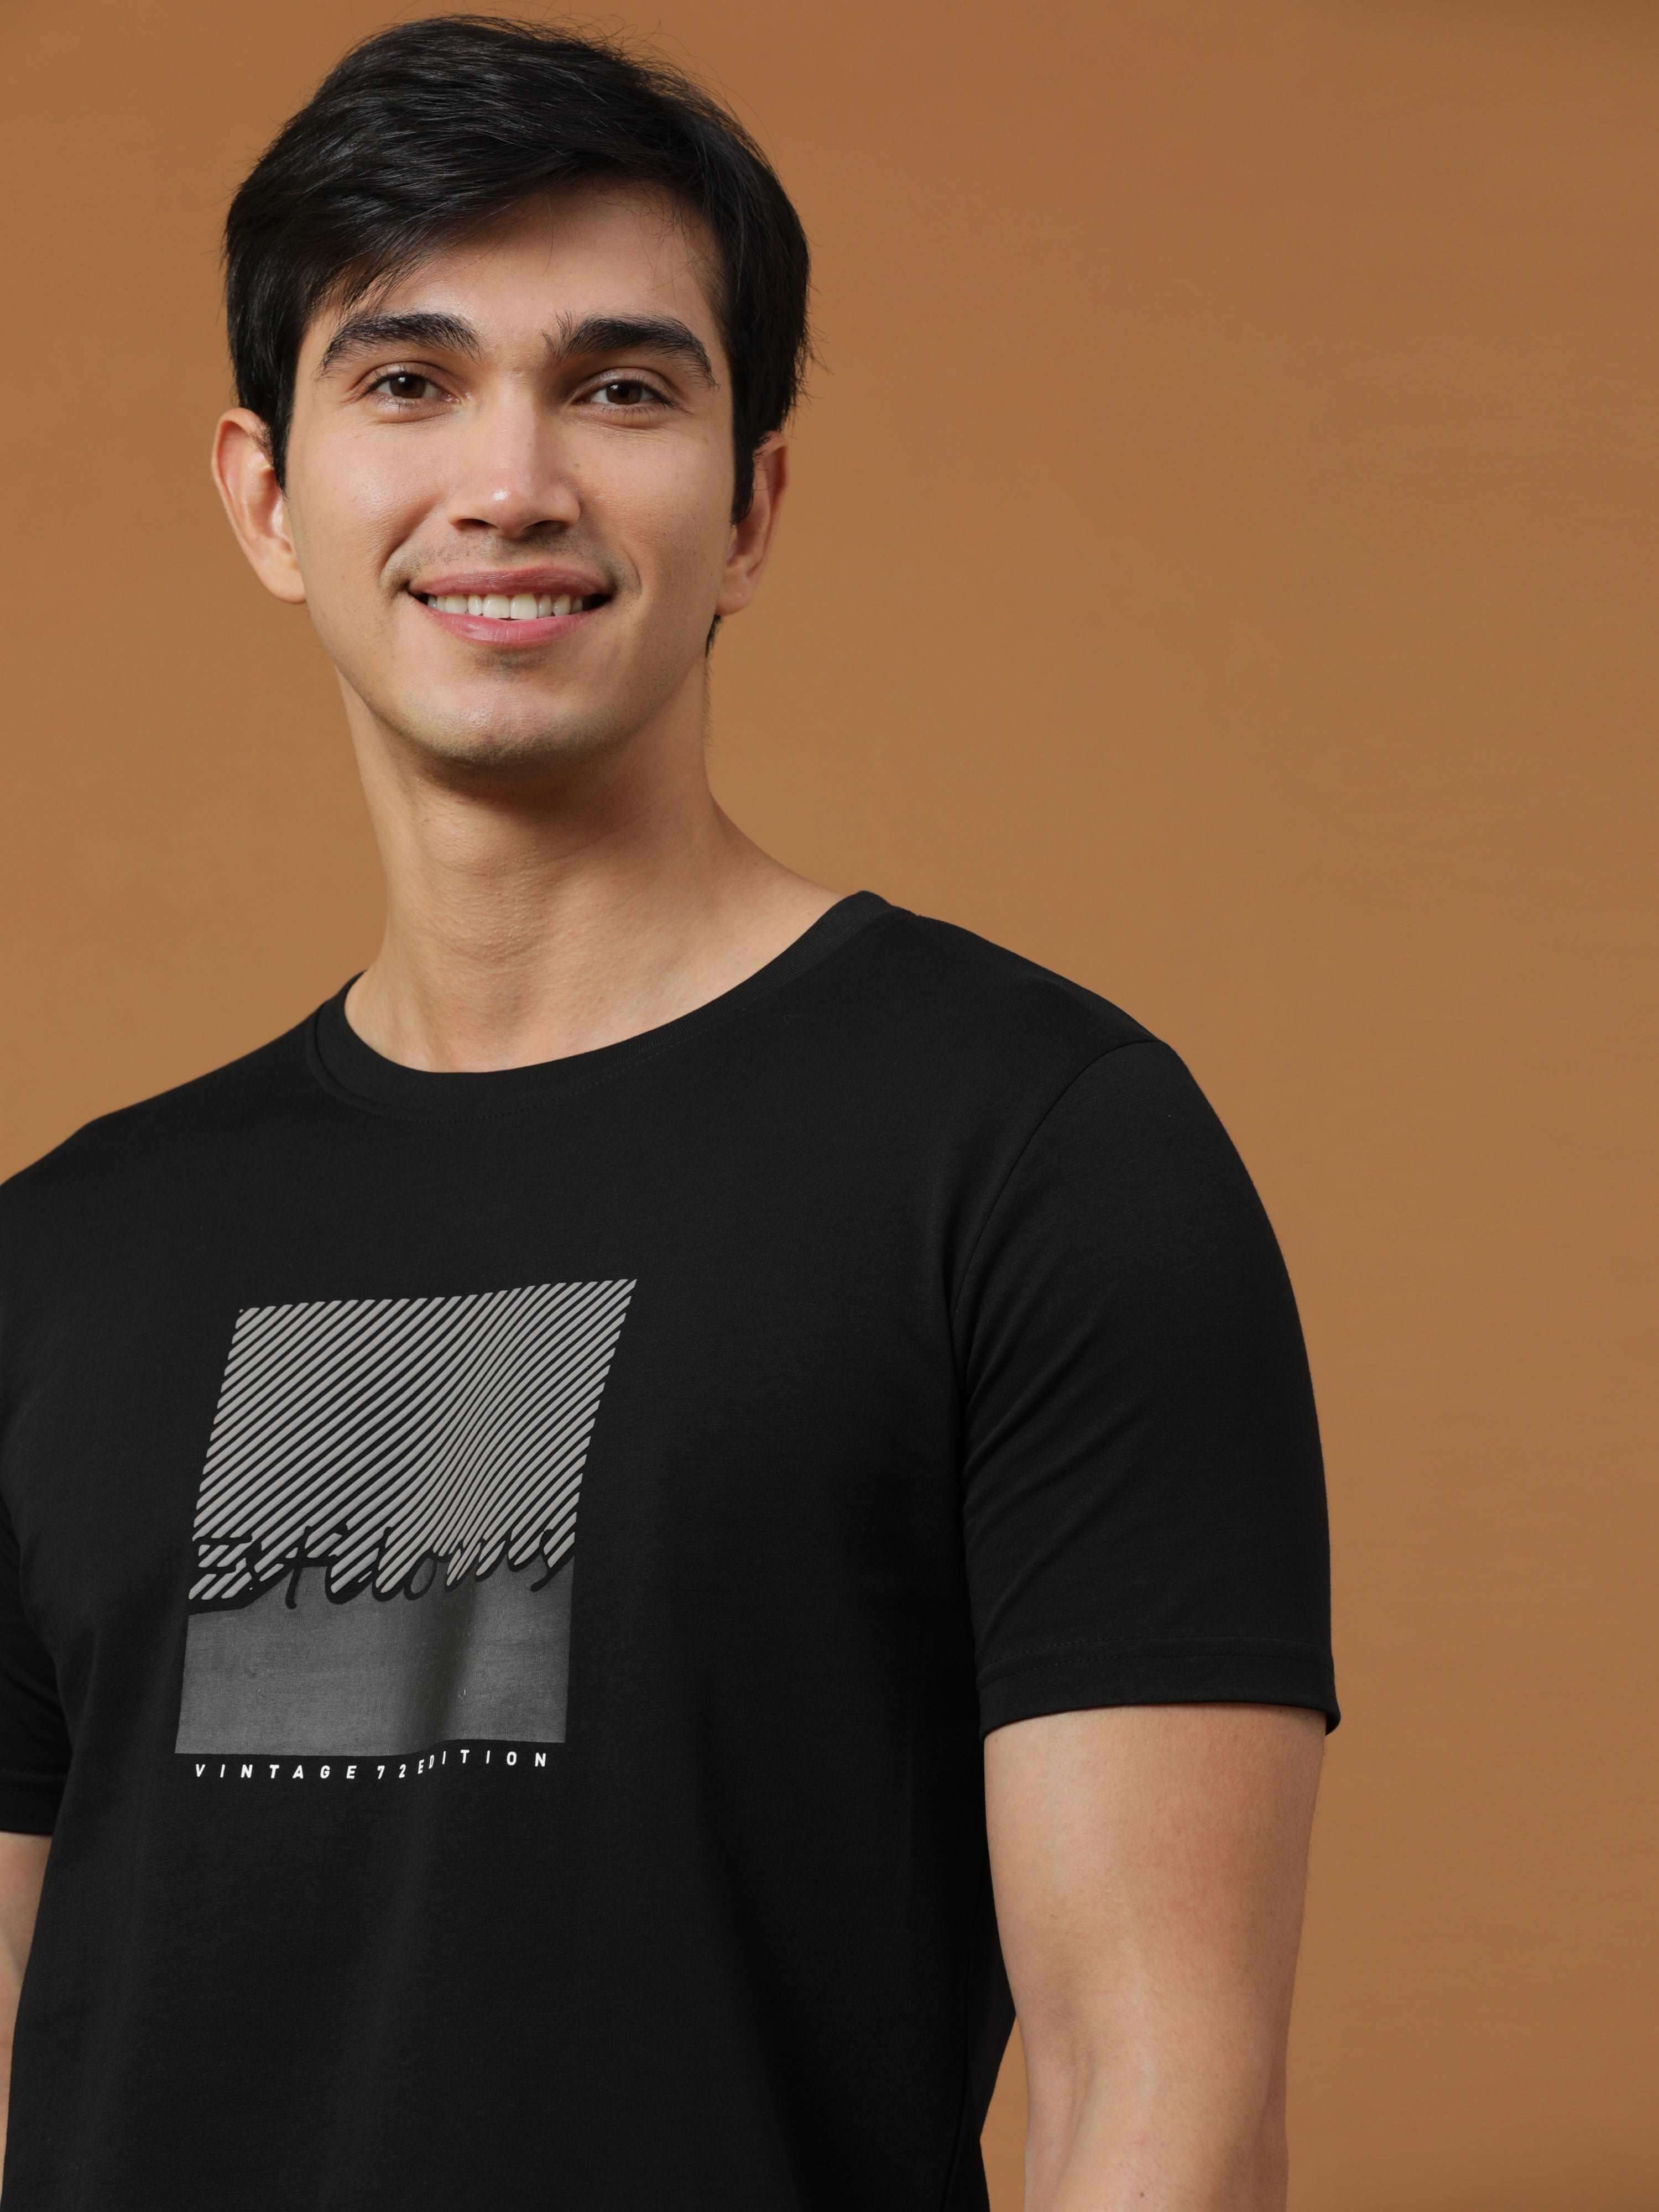 Black Vintage 72 Edition T Shirt shop online at Estilocus. 100% Cotton Designed and printed on knitted fabric. The fabric is stretchy and lightweight, with a soft skin feel and no wrinkles. Crew neck collar which is smooth on the neck and keeps you comfor